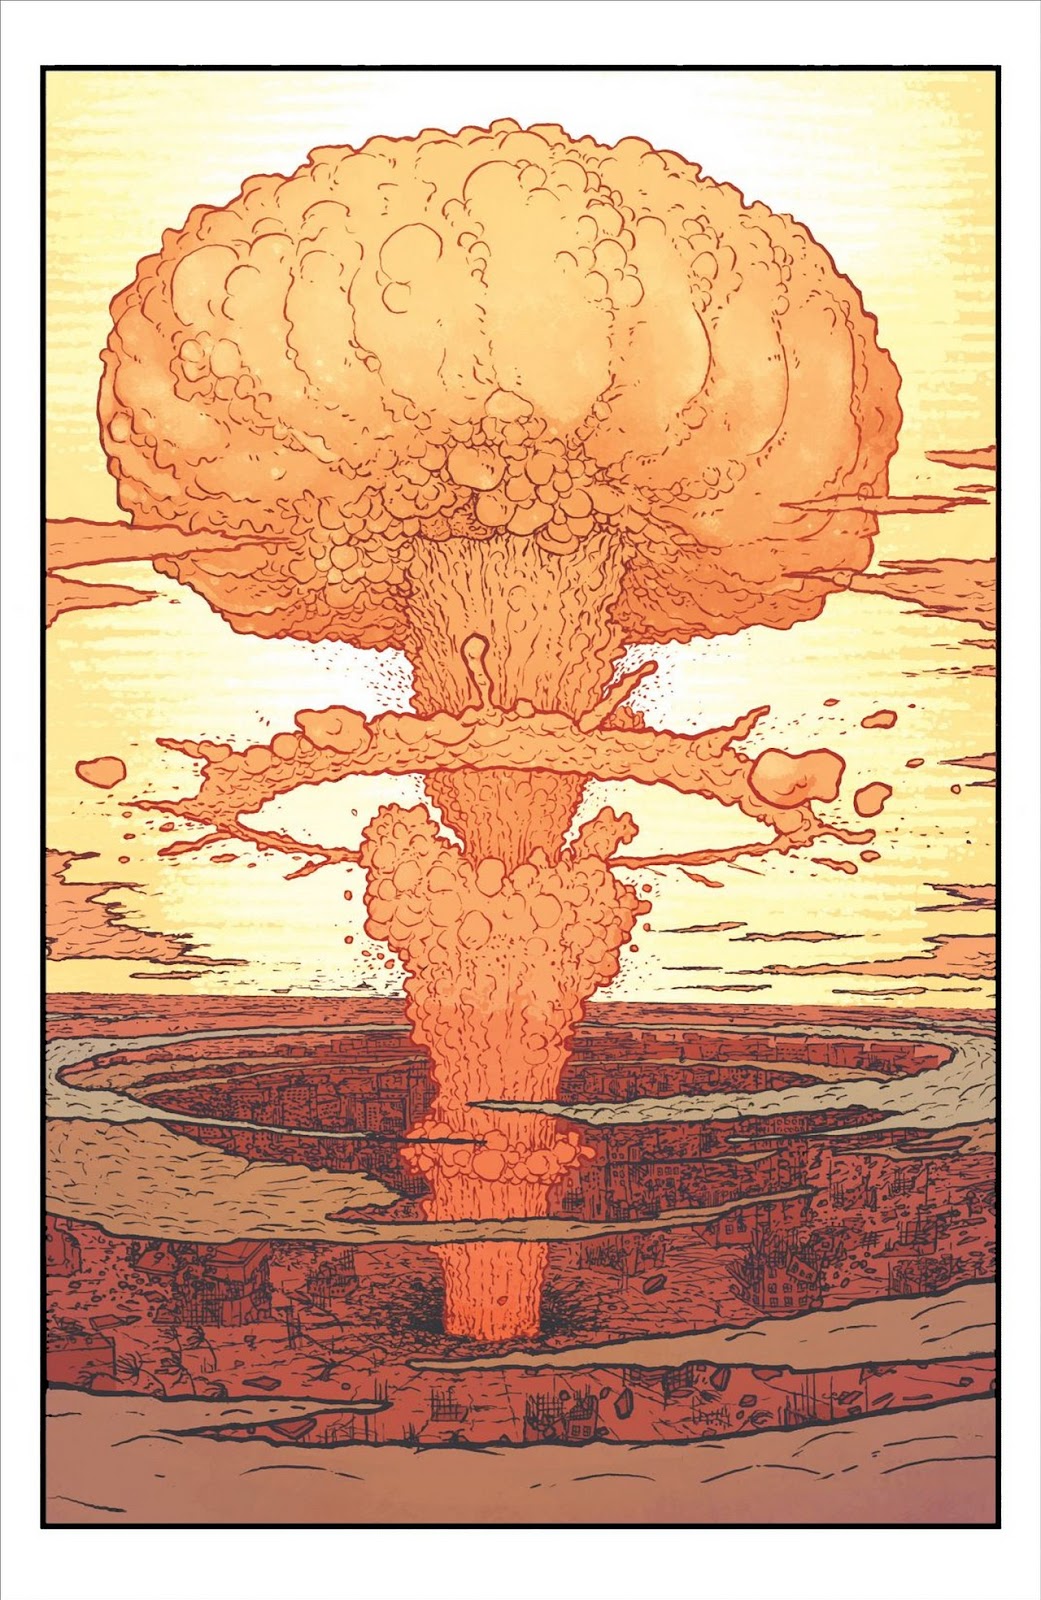 Ultimate Guide to Cool: Manhattan Projects proves Jonathan Hickman is